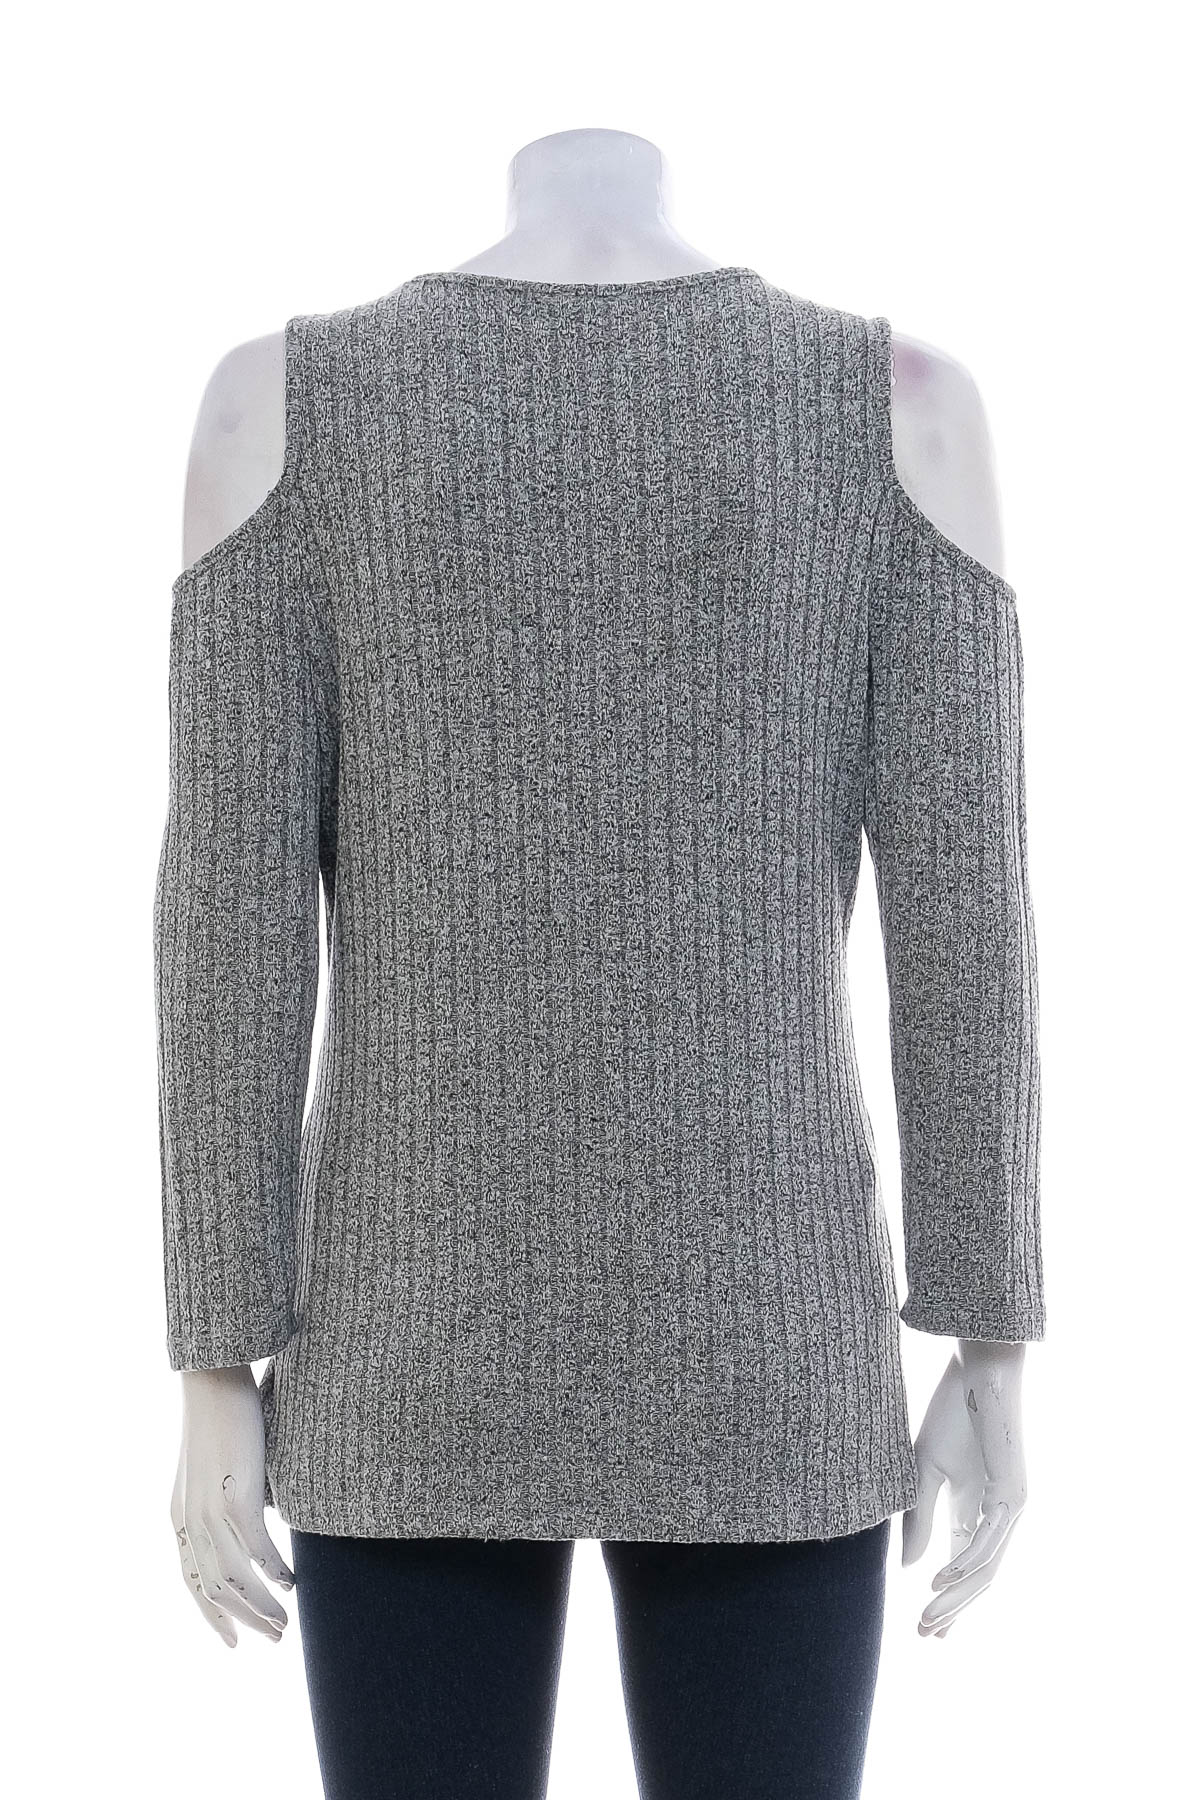 Women's sweater - Lily White - 1